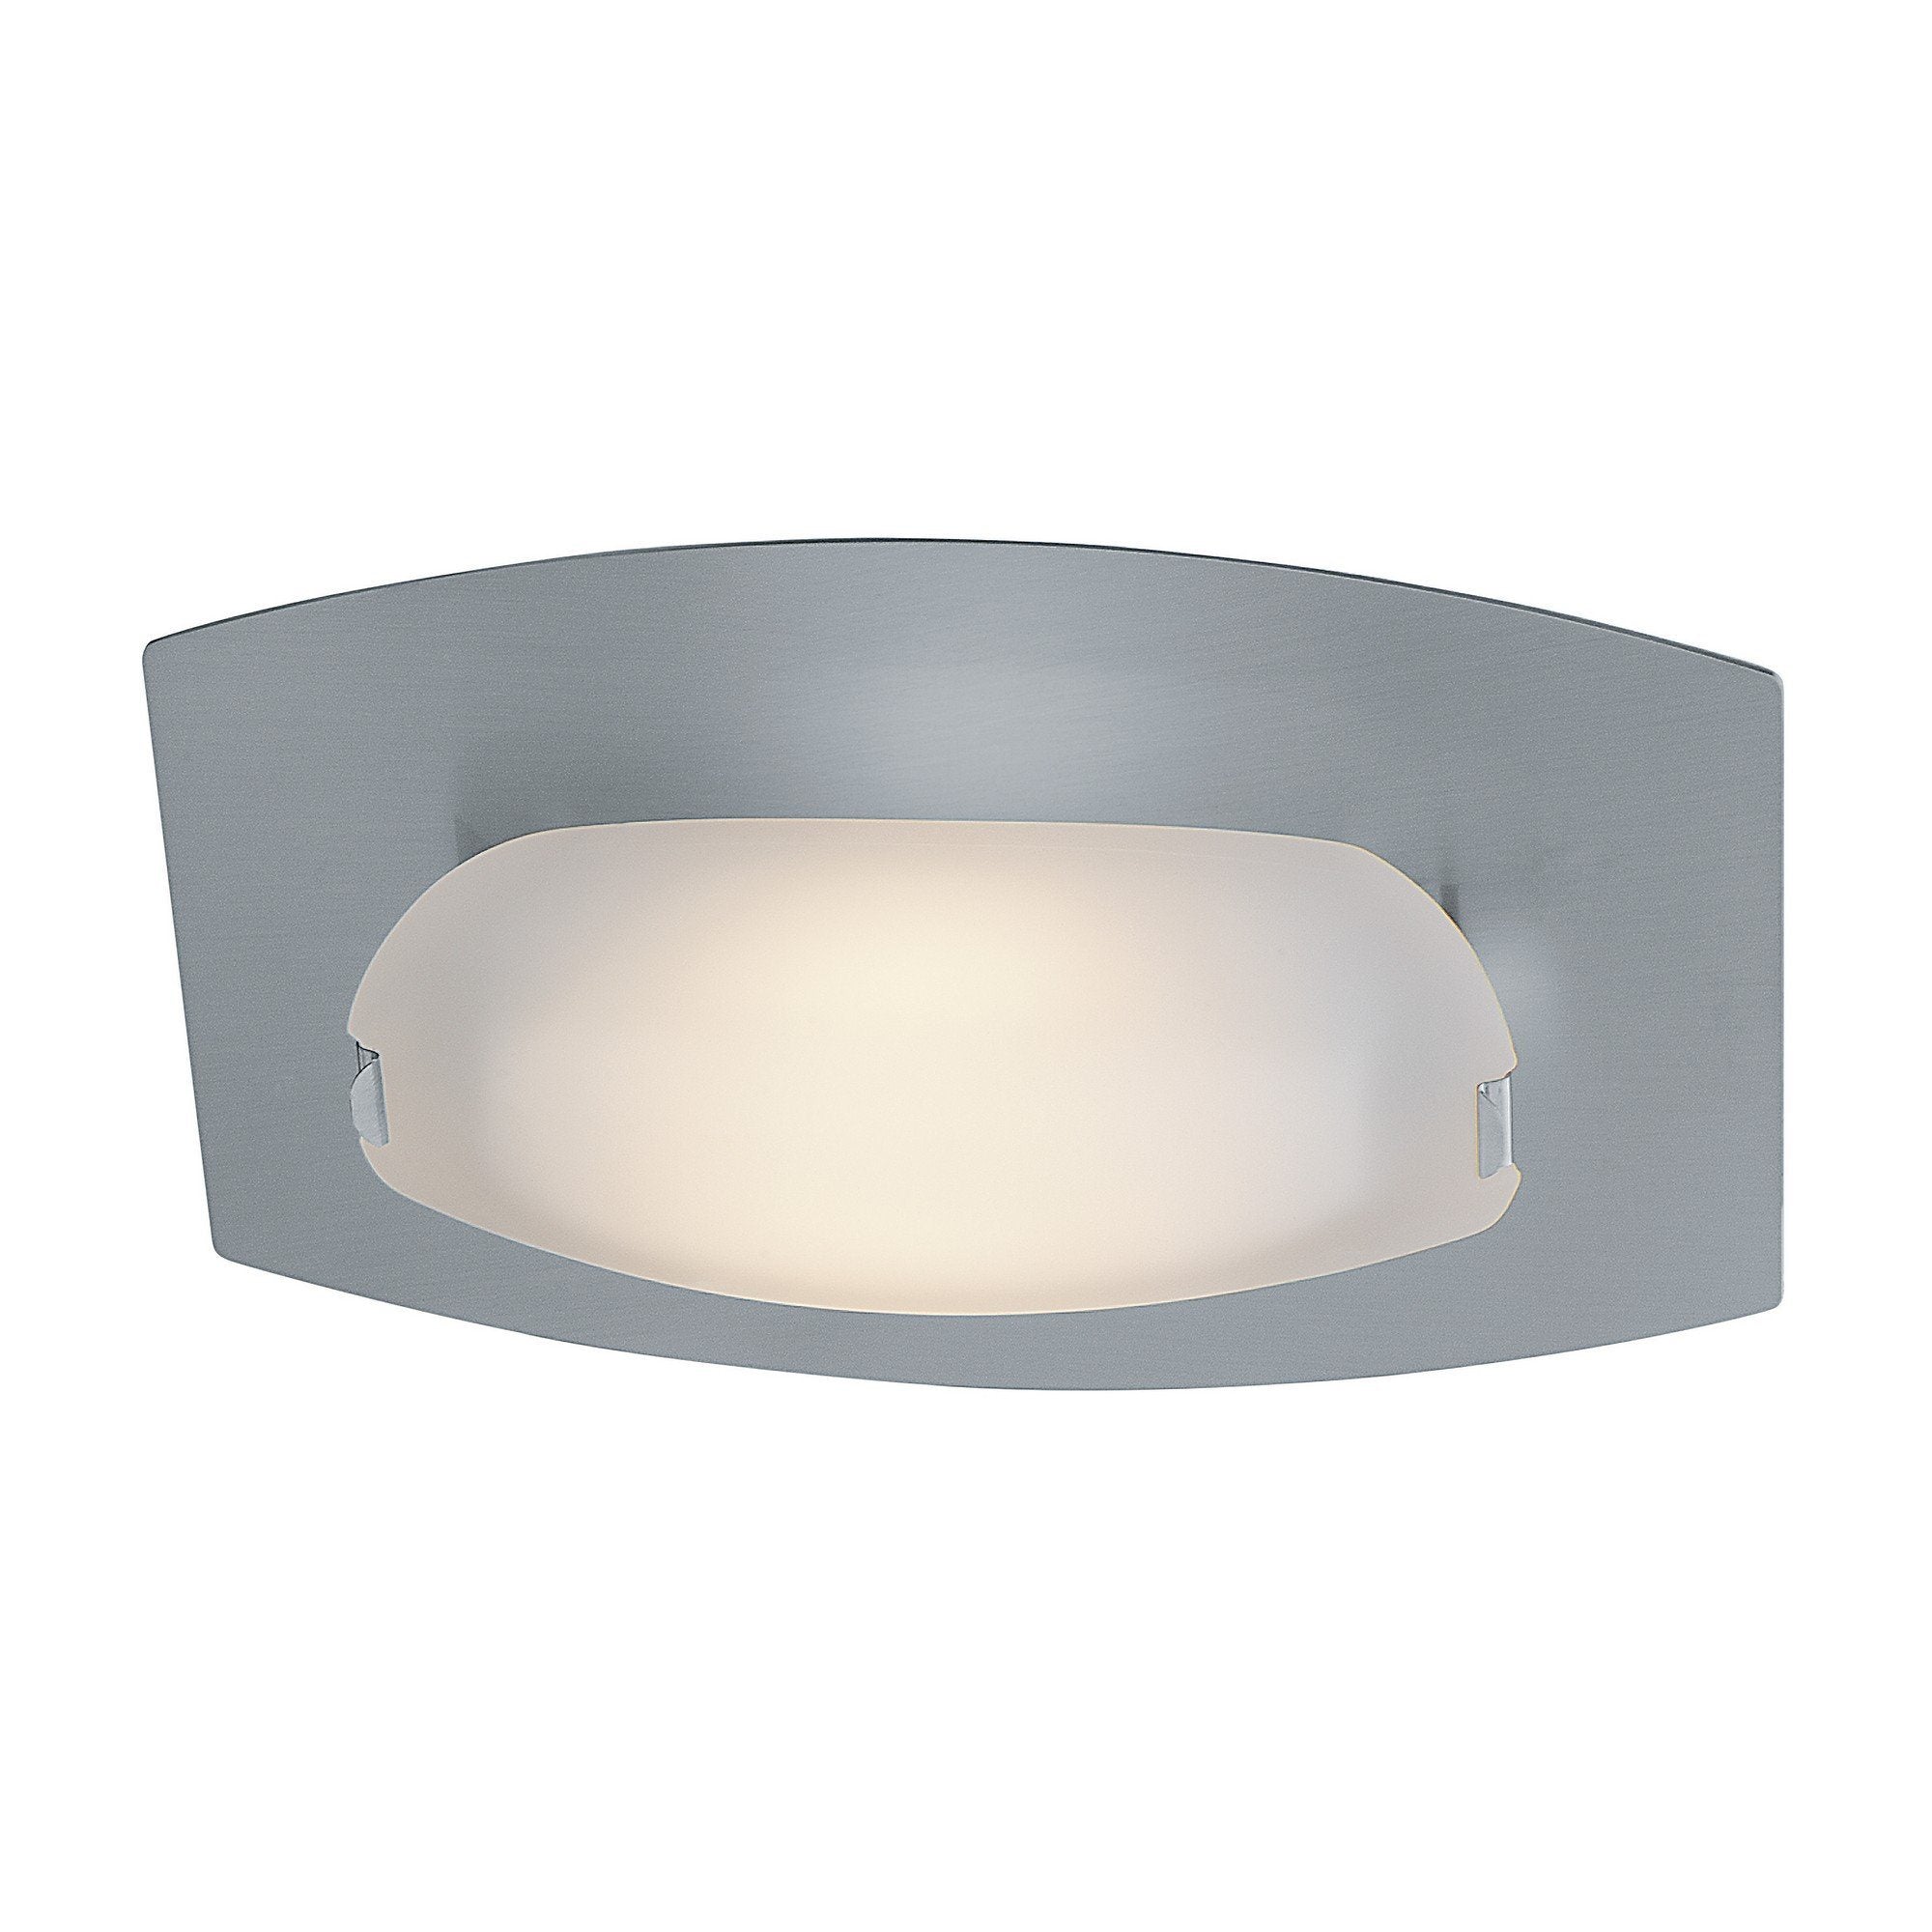 Thea Oval Cased Glass - Matte Chrome Finish Wall Access Lighting 